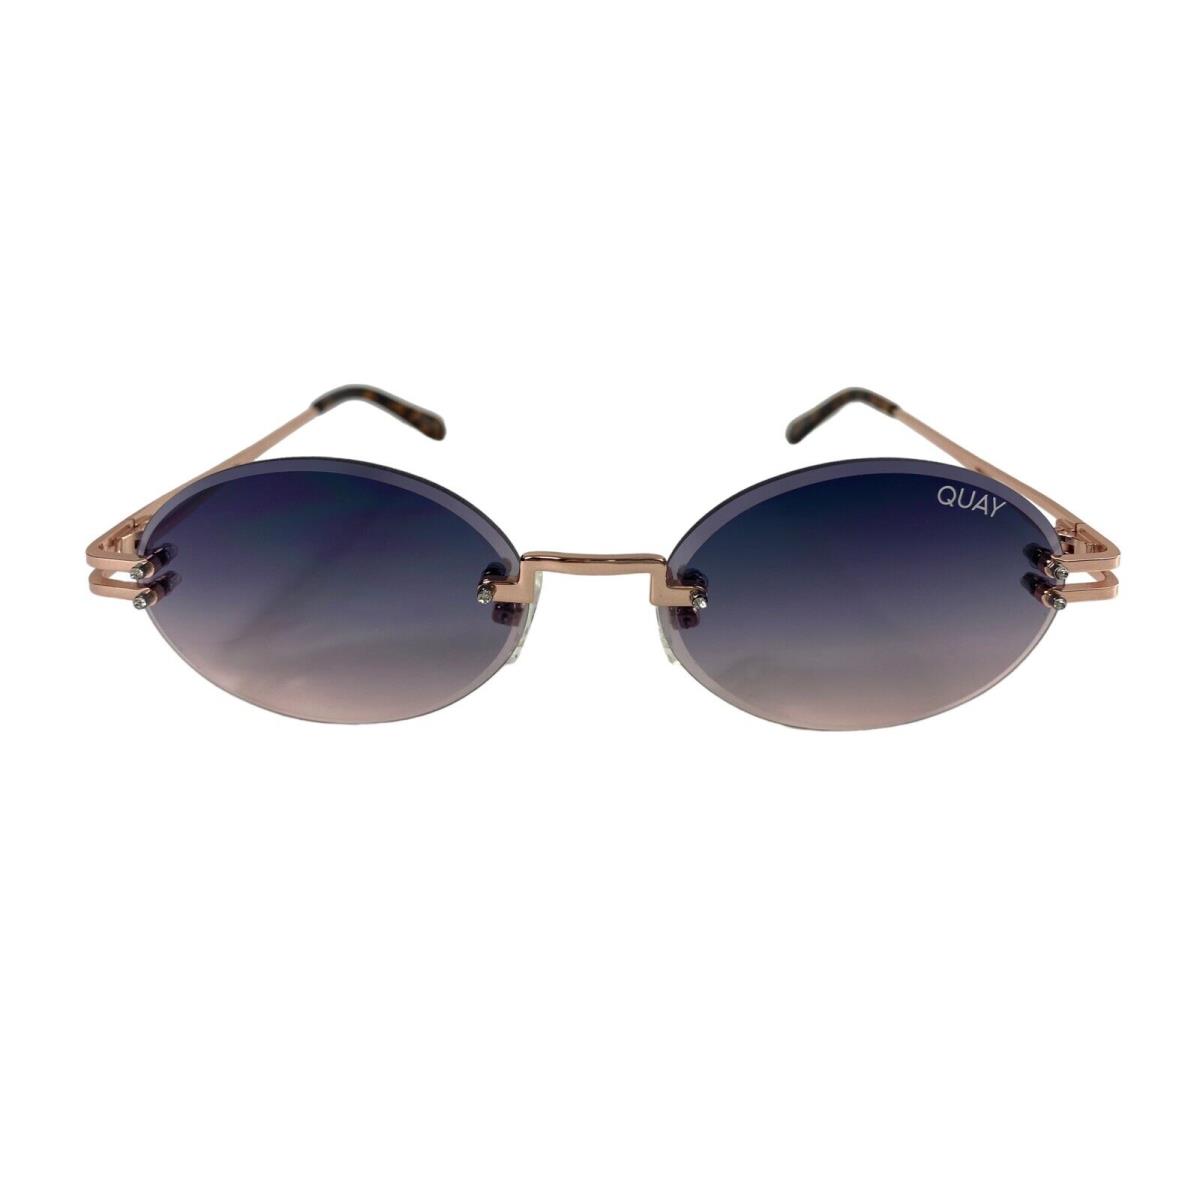 Quay Sunglasses Sunnies Gradient Y2K Oval Gold Women Literally Obsessed Key